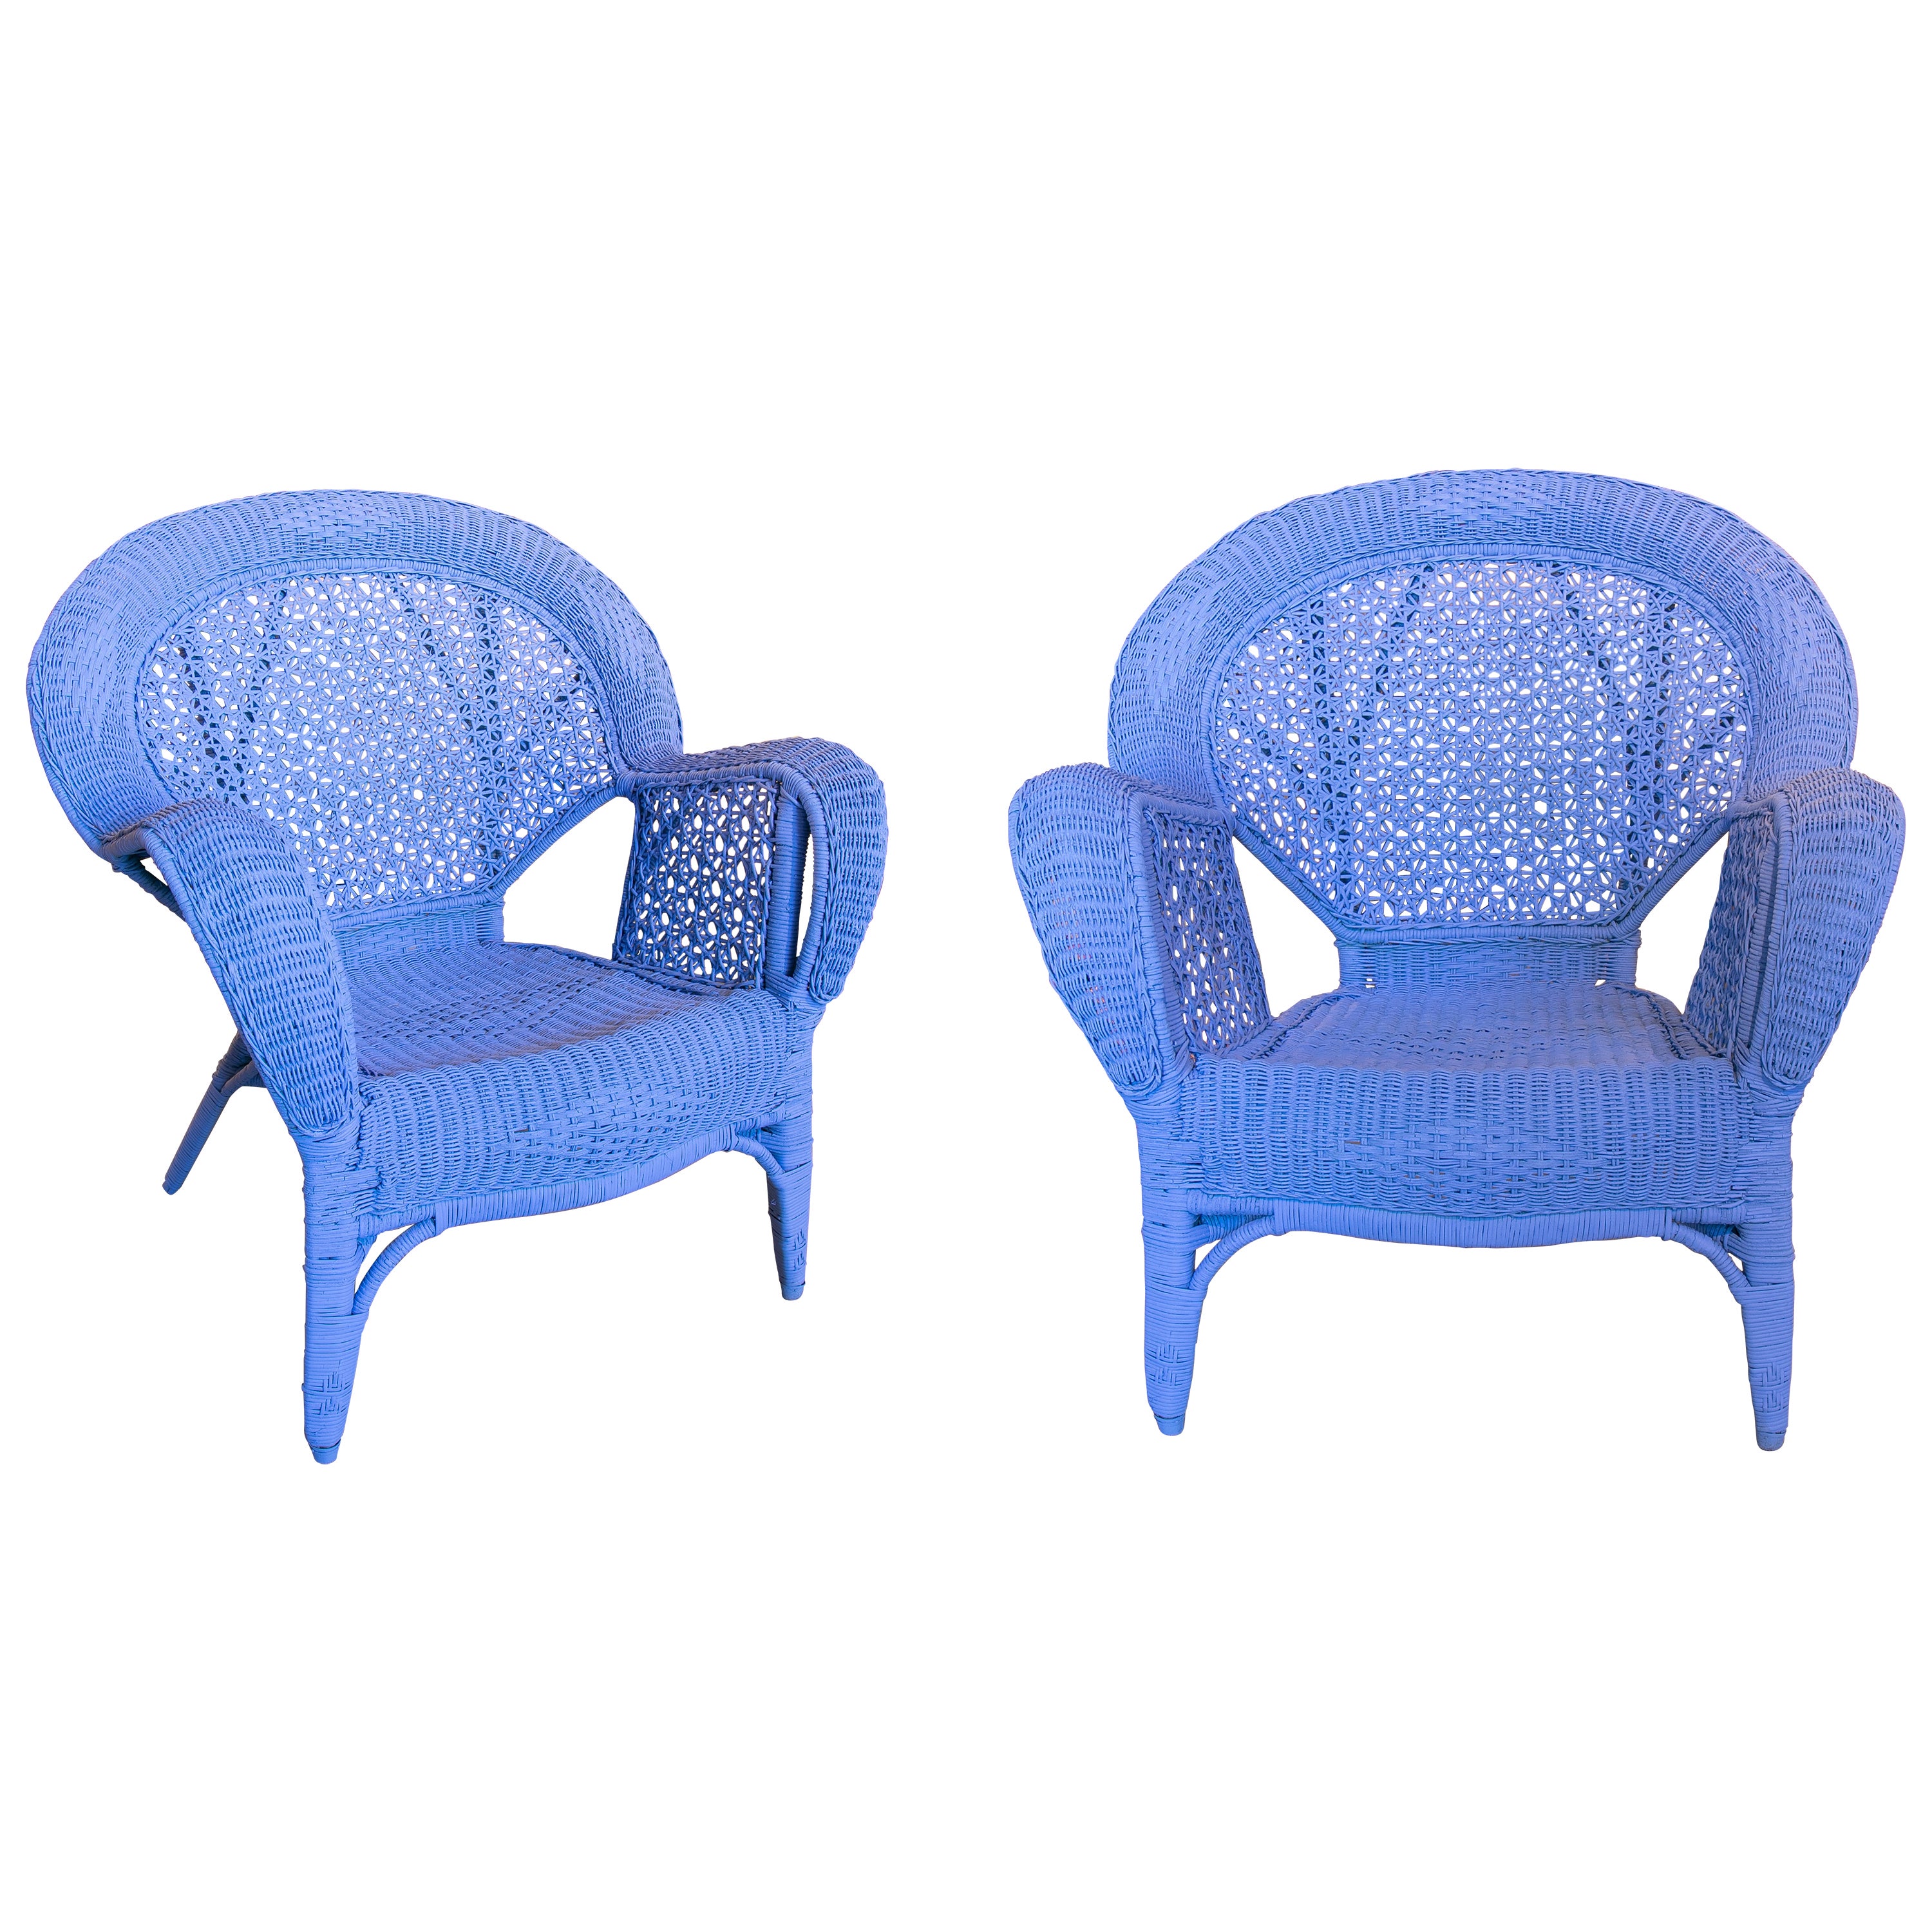 Pair of Handmade Bamboo and Wicker Armchairs with Wide Backrest